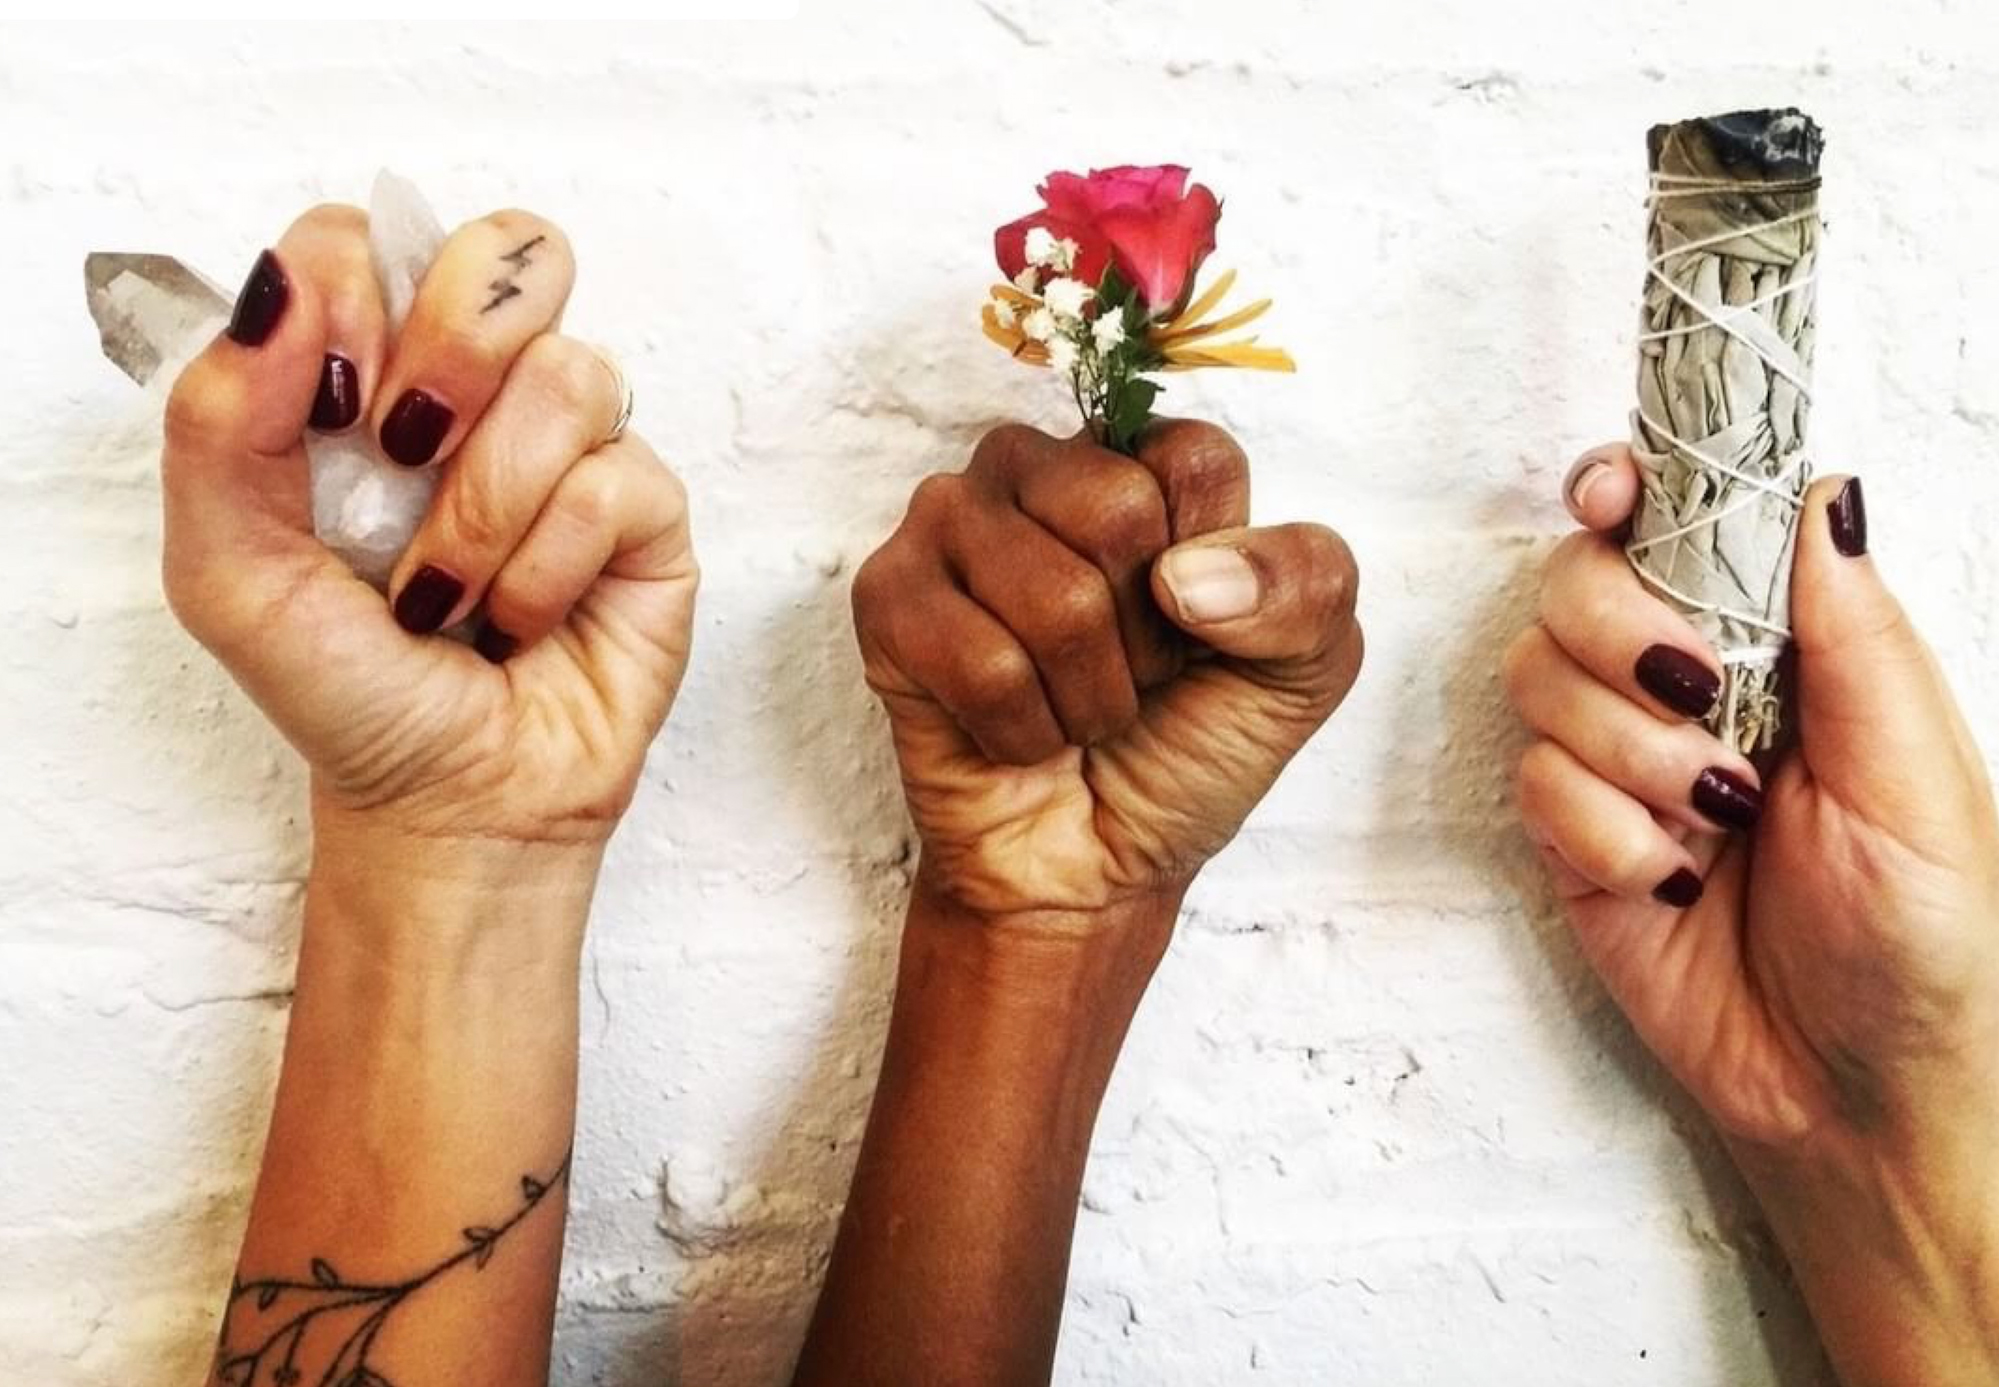 Three POC hands for racial justice